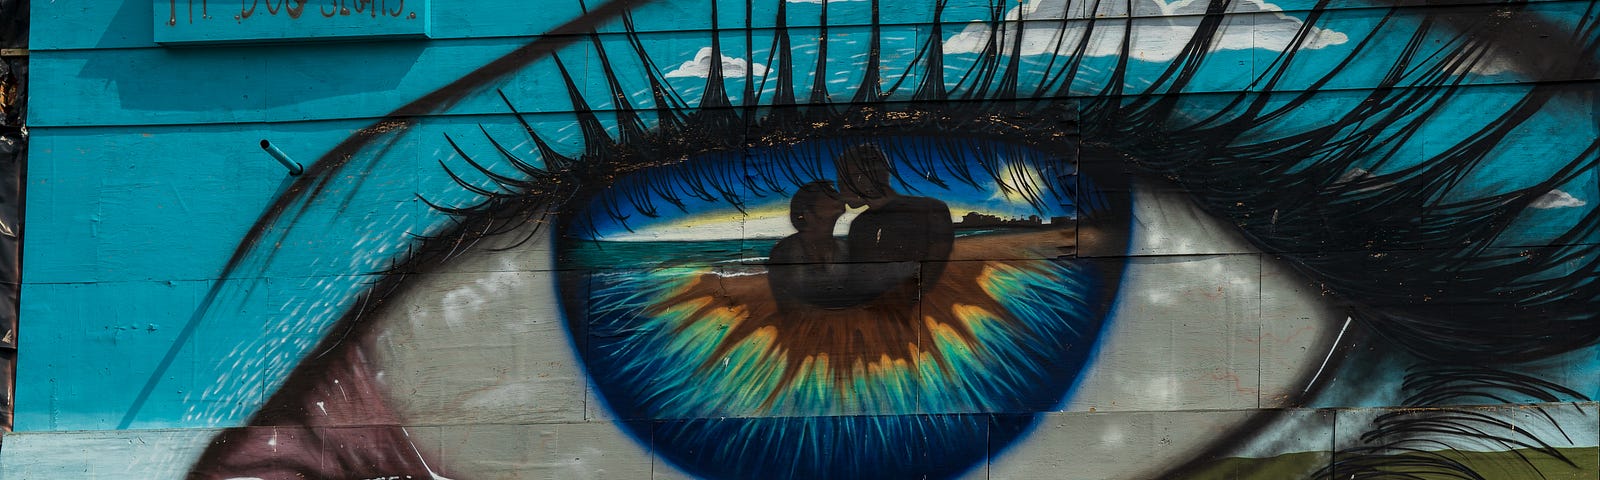 Colorful painting of an eye on the side of a building. Blue and green palette. Glaucoma is a leading cause of blindness.